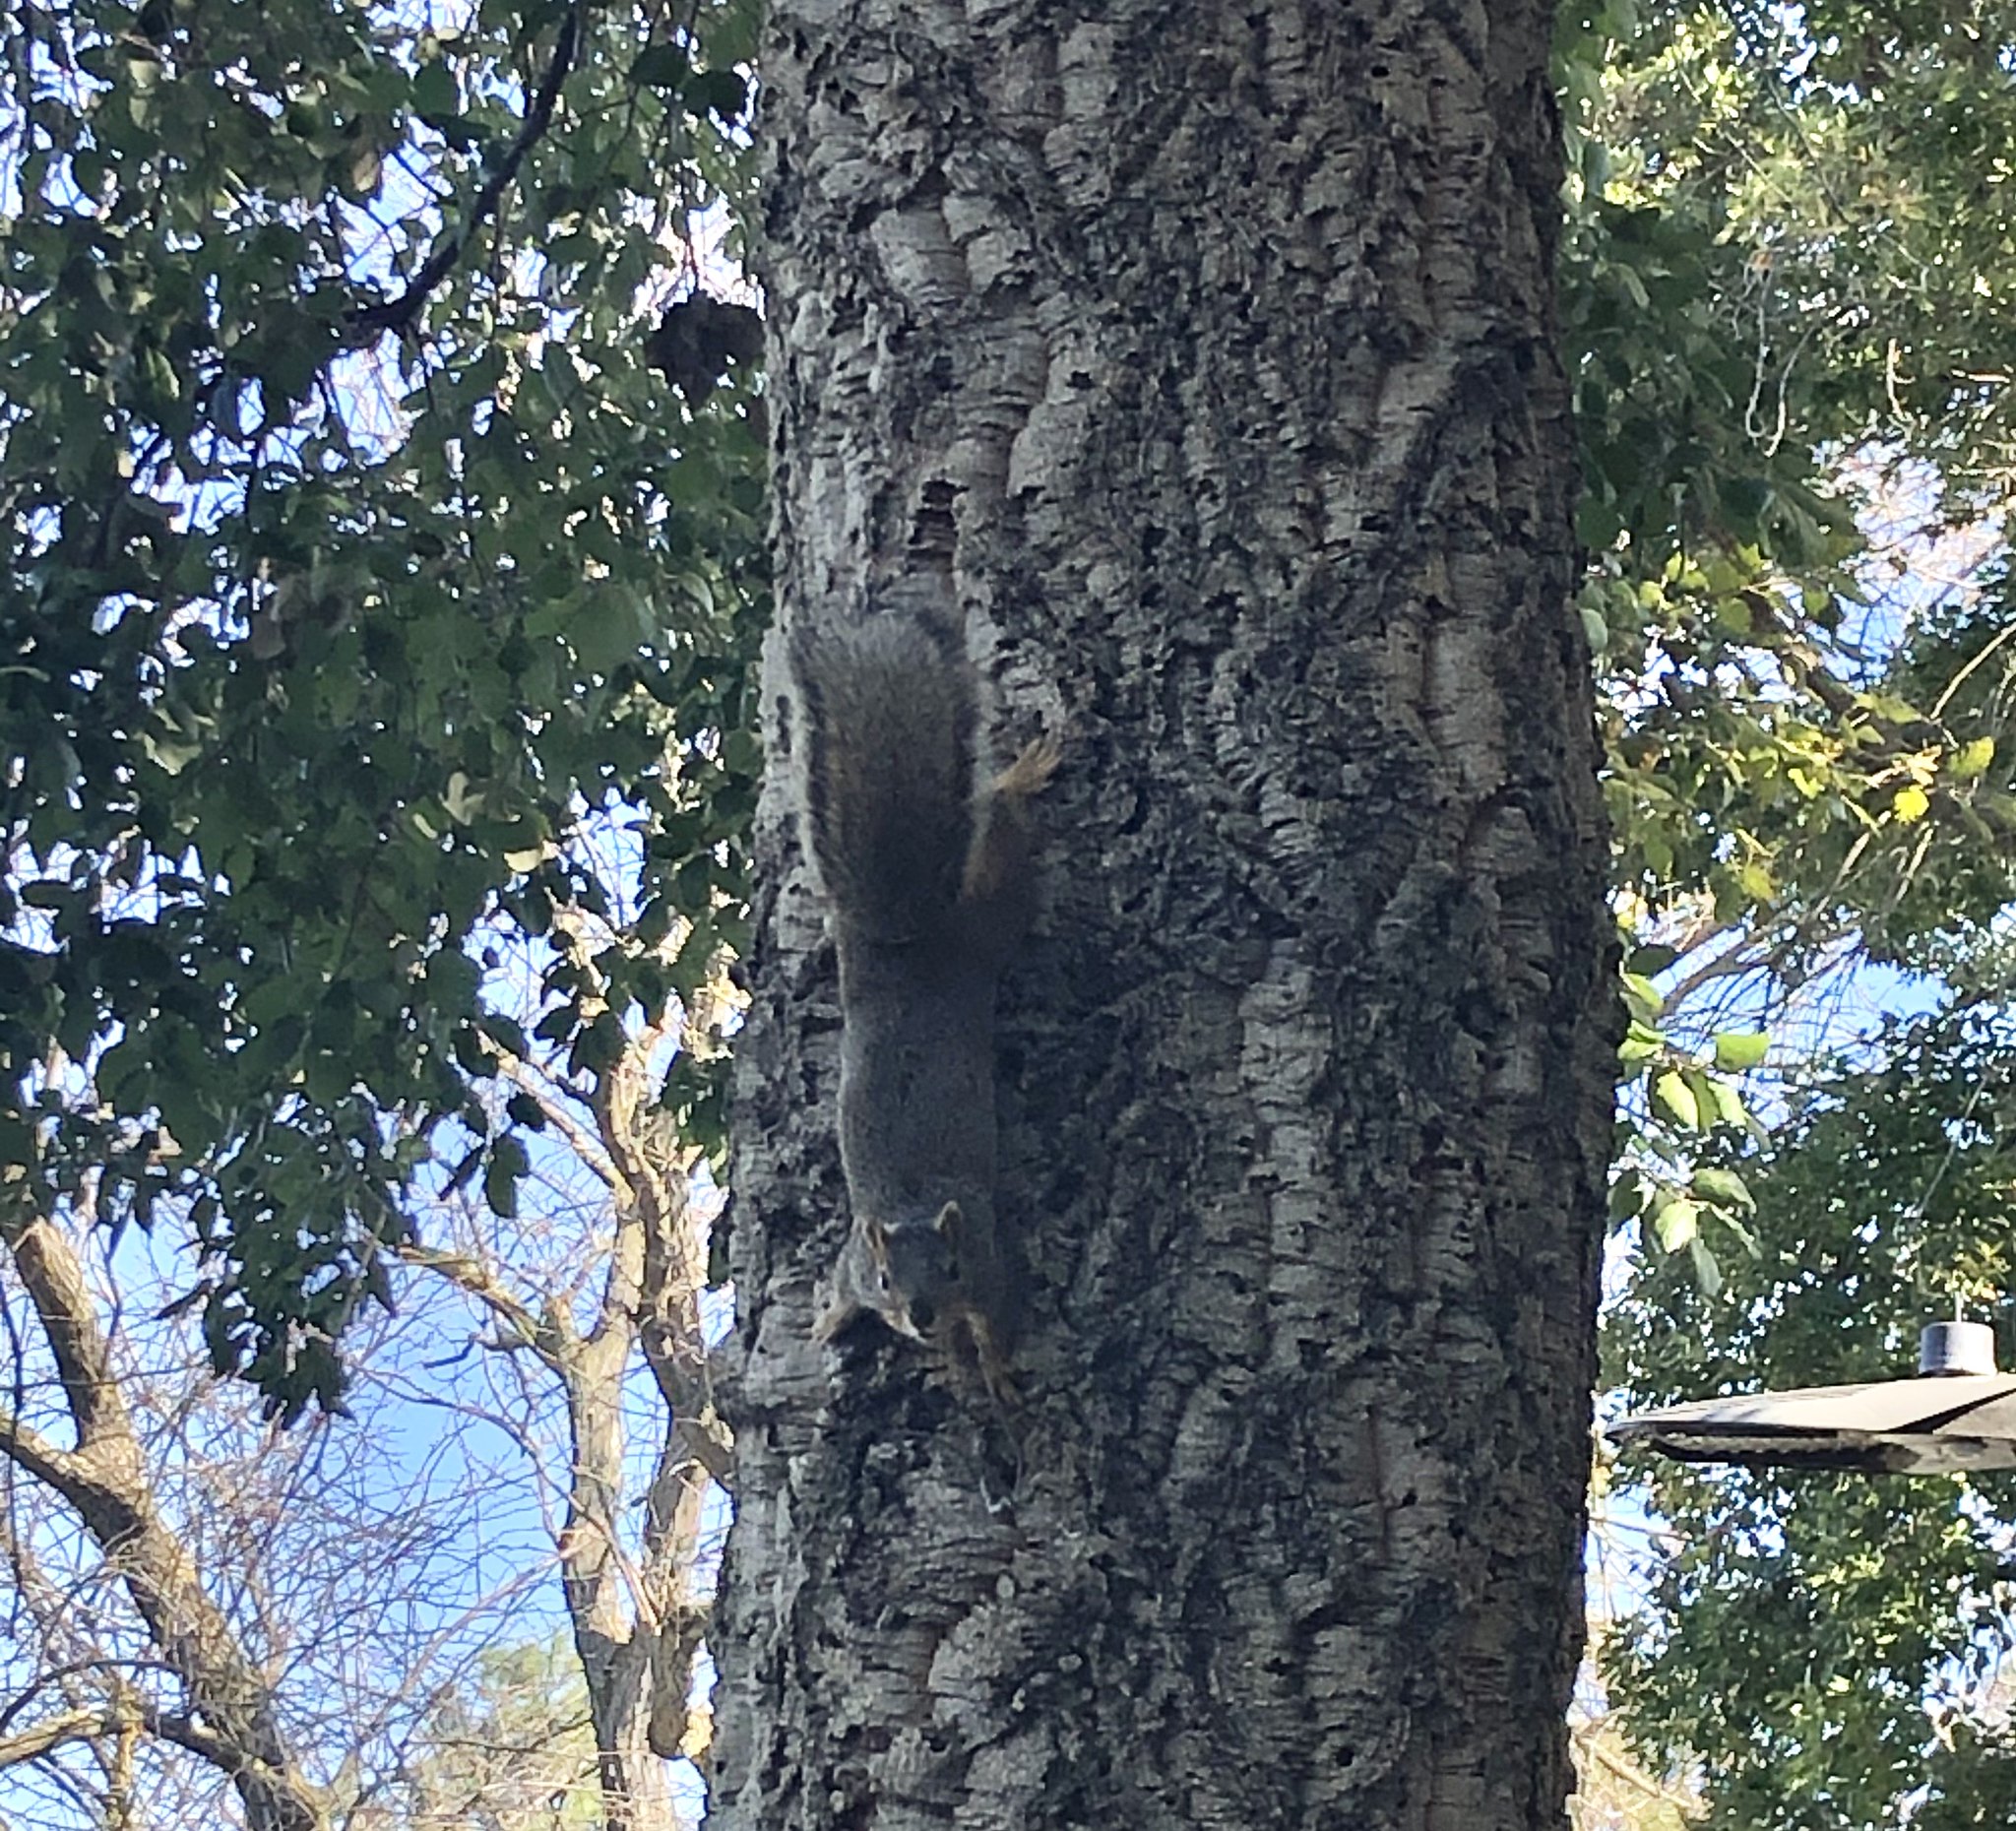 Squirrel on a tree looking at the camera